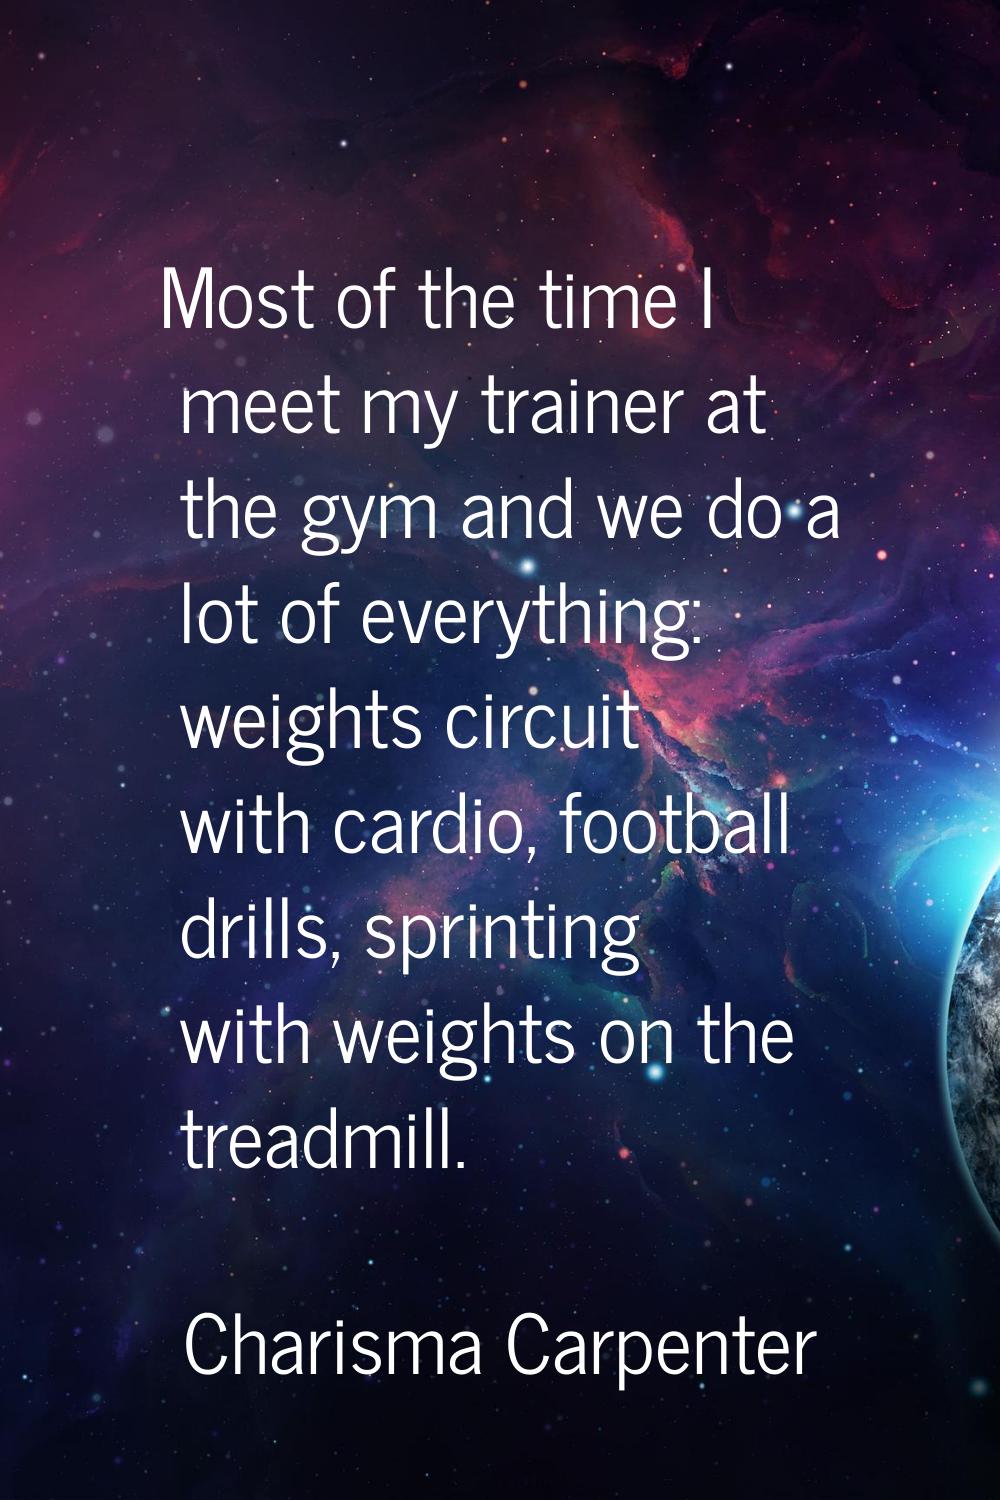 Most of the time I meet my trainer at the gym and we do a lot of everything: weights circuit with c